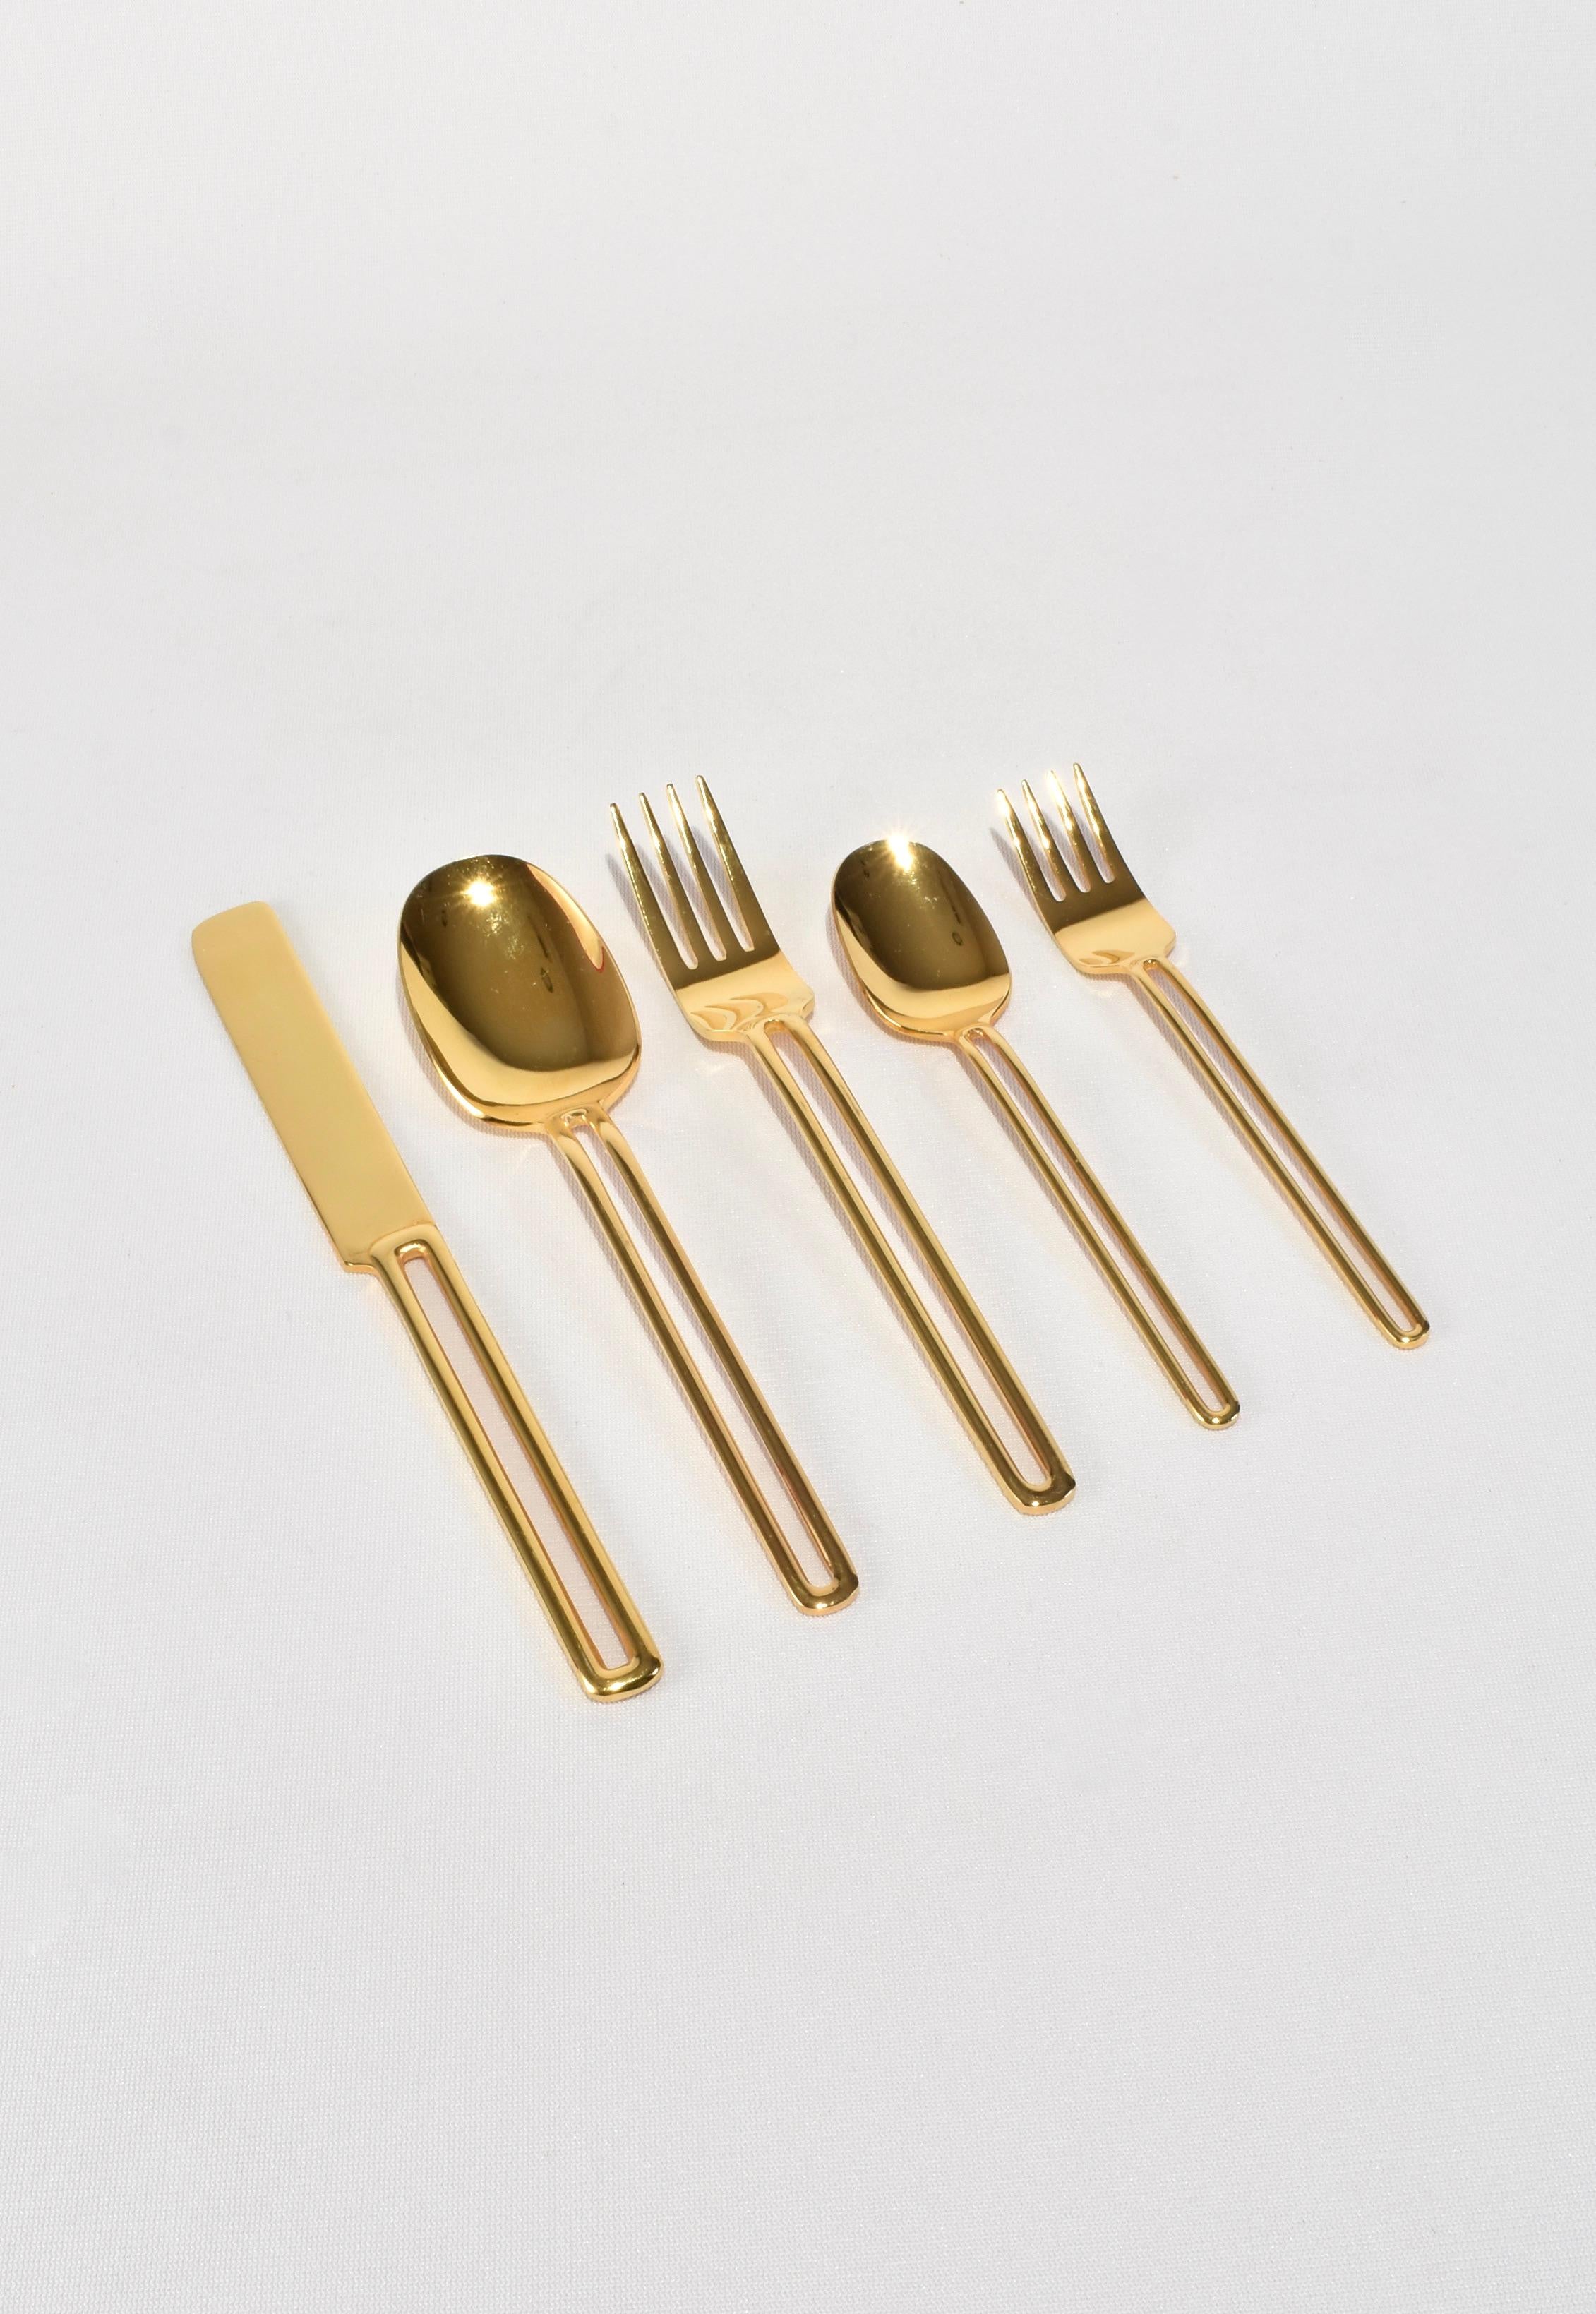 Rare, gold stainless steel five-piece flatware set with cutout handle. Stamped Oxford Hall, Stainless Japan.

Purchase includes one set of five pieces, eight sets available.

Dimensions: 
Knife: 9